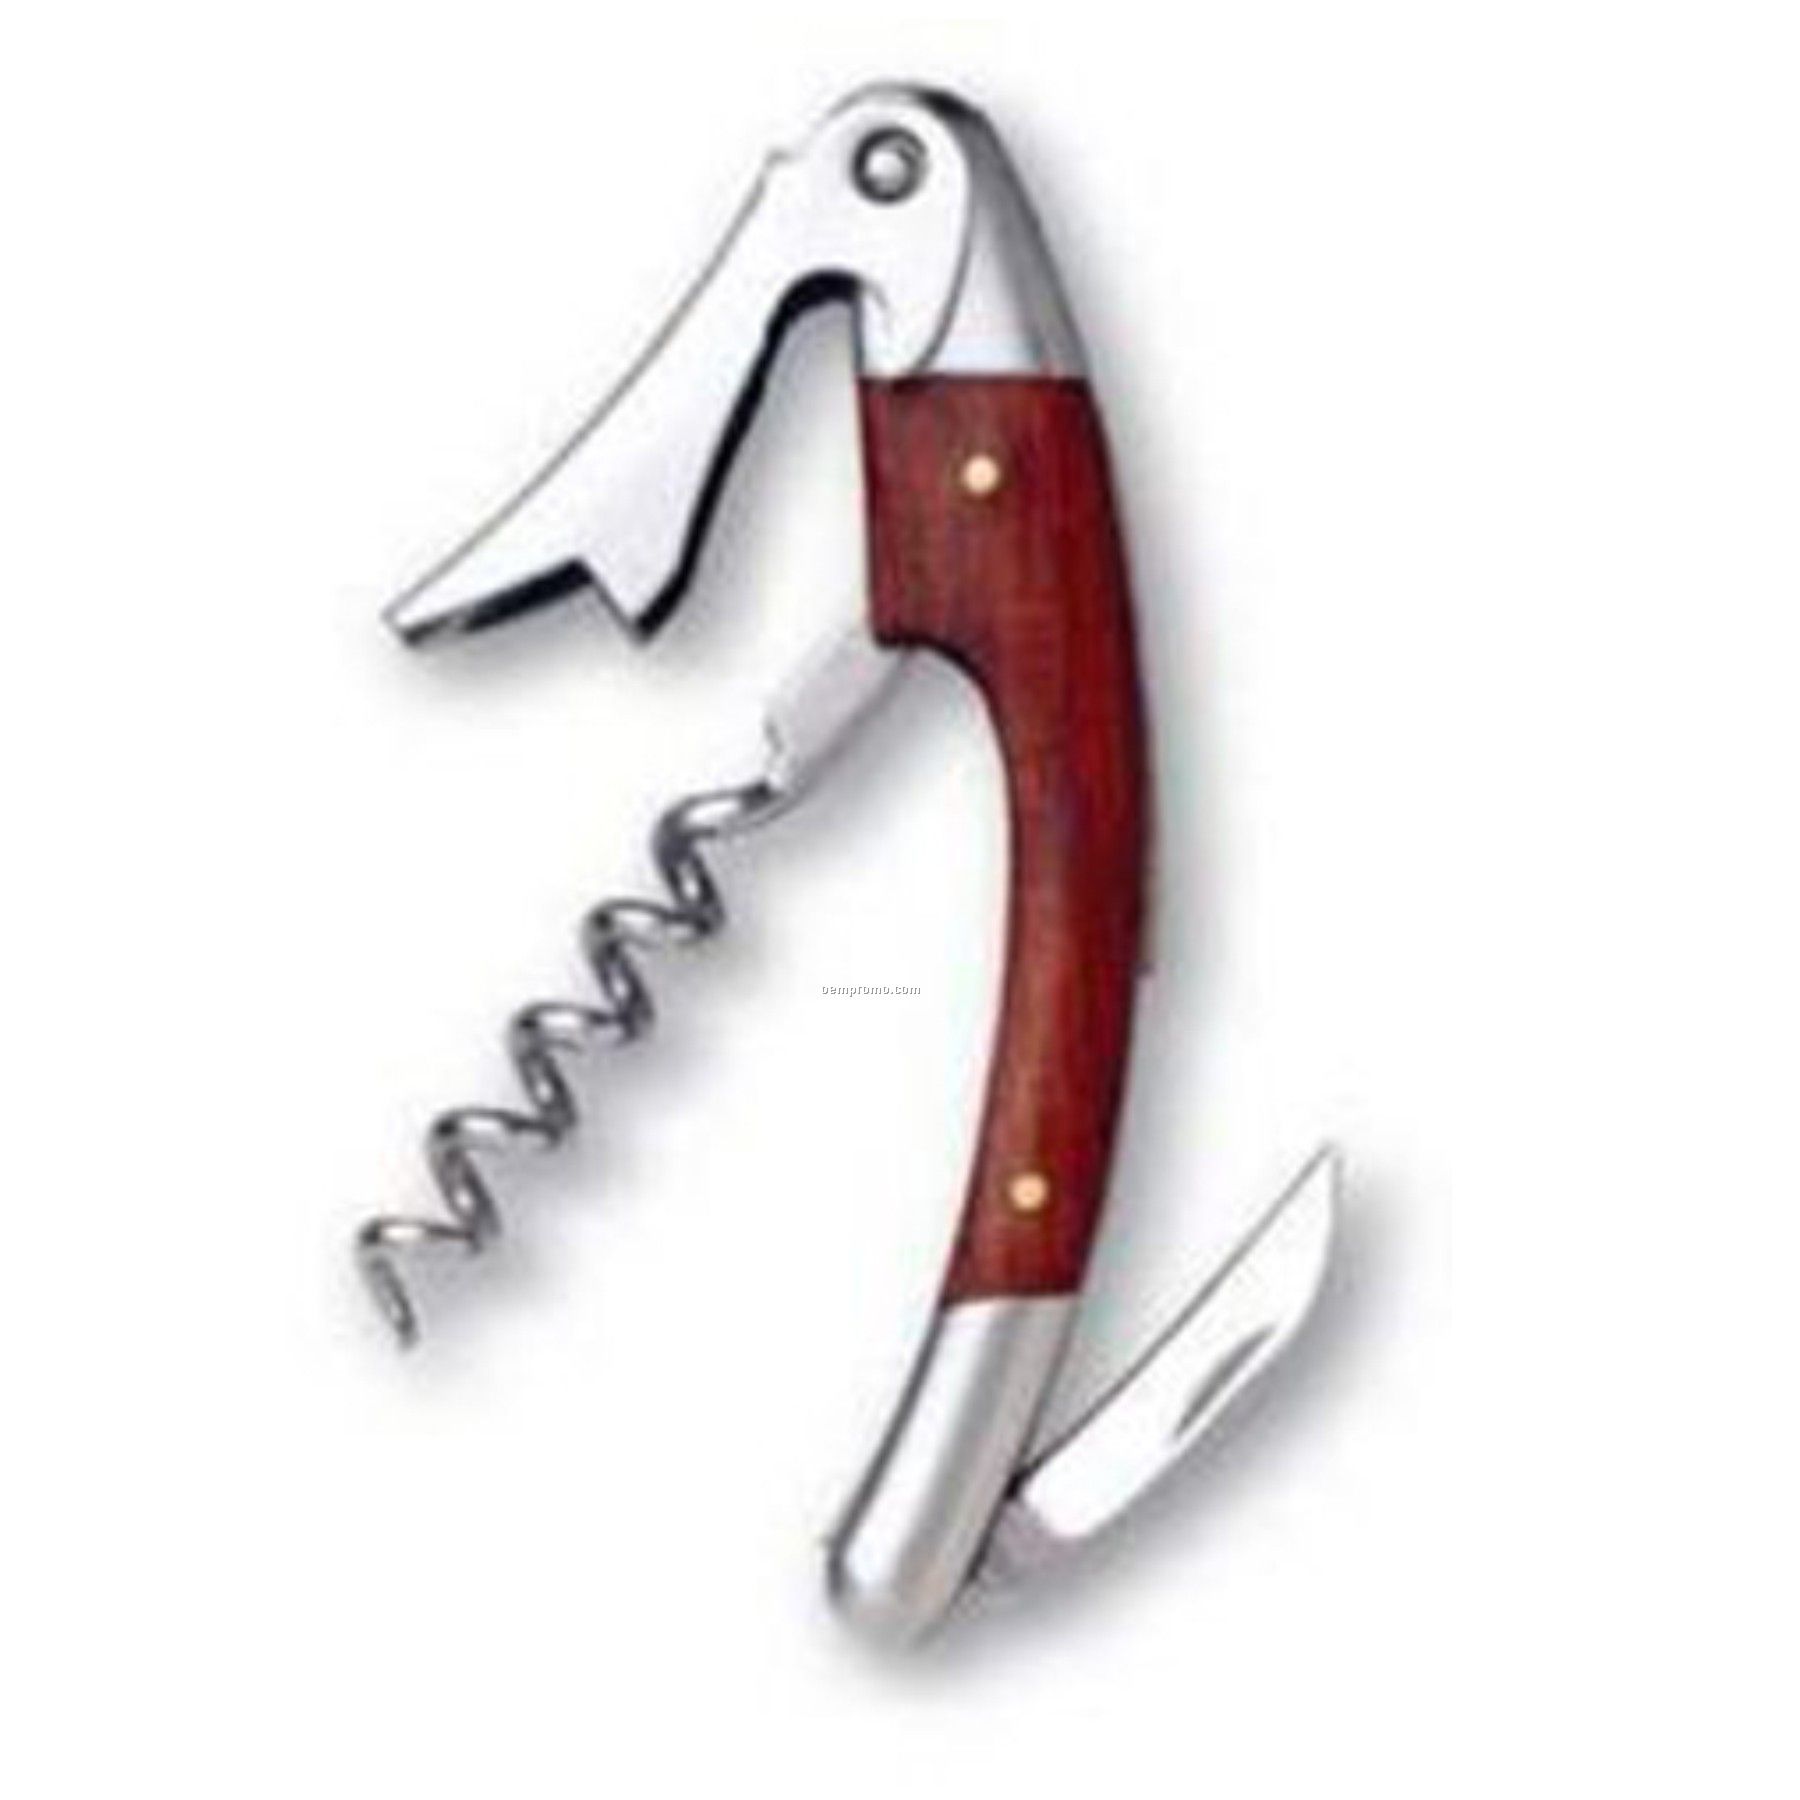 Curved Stainless Steel Corkscrew With Burgundy Color Wood Inset